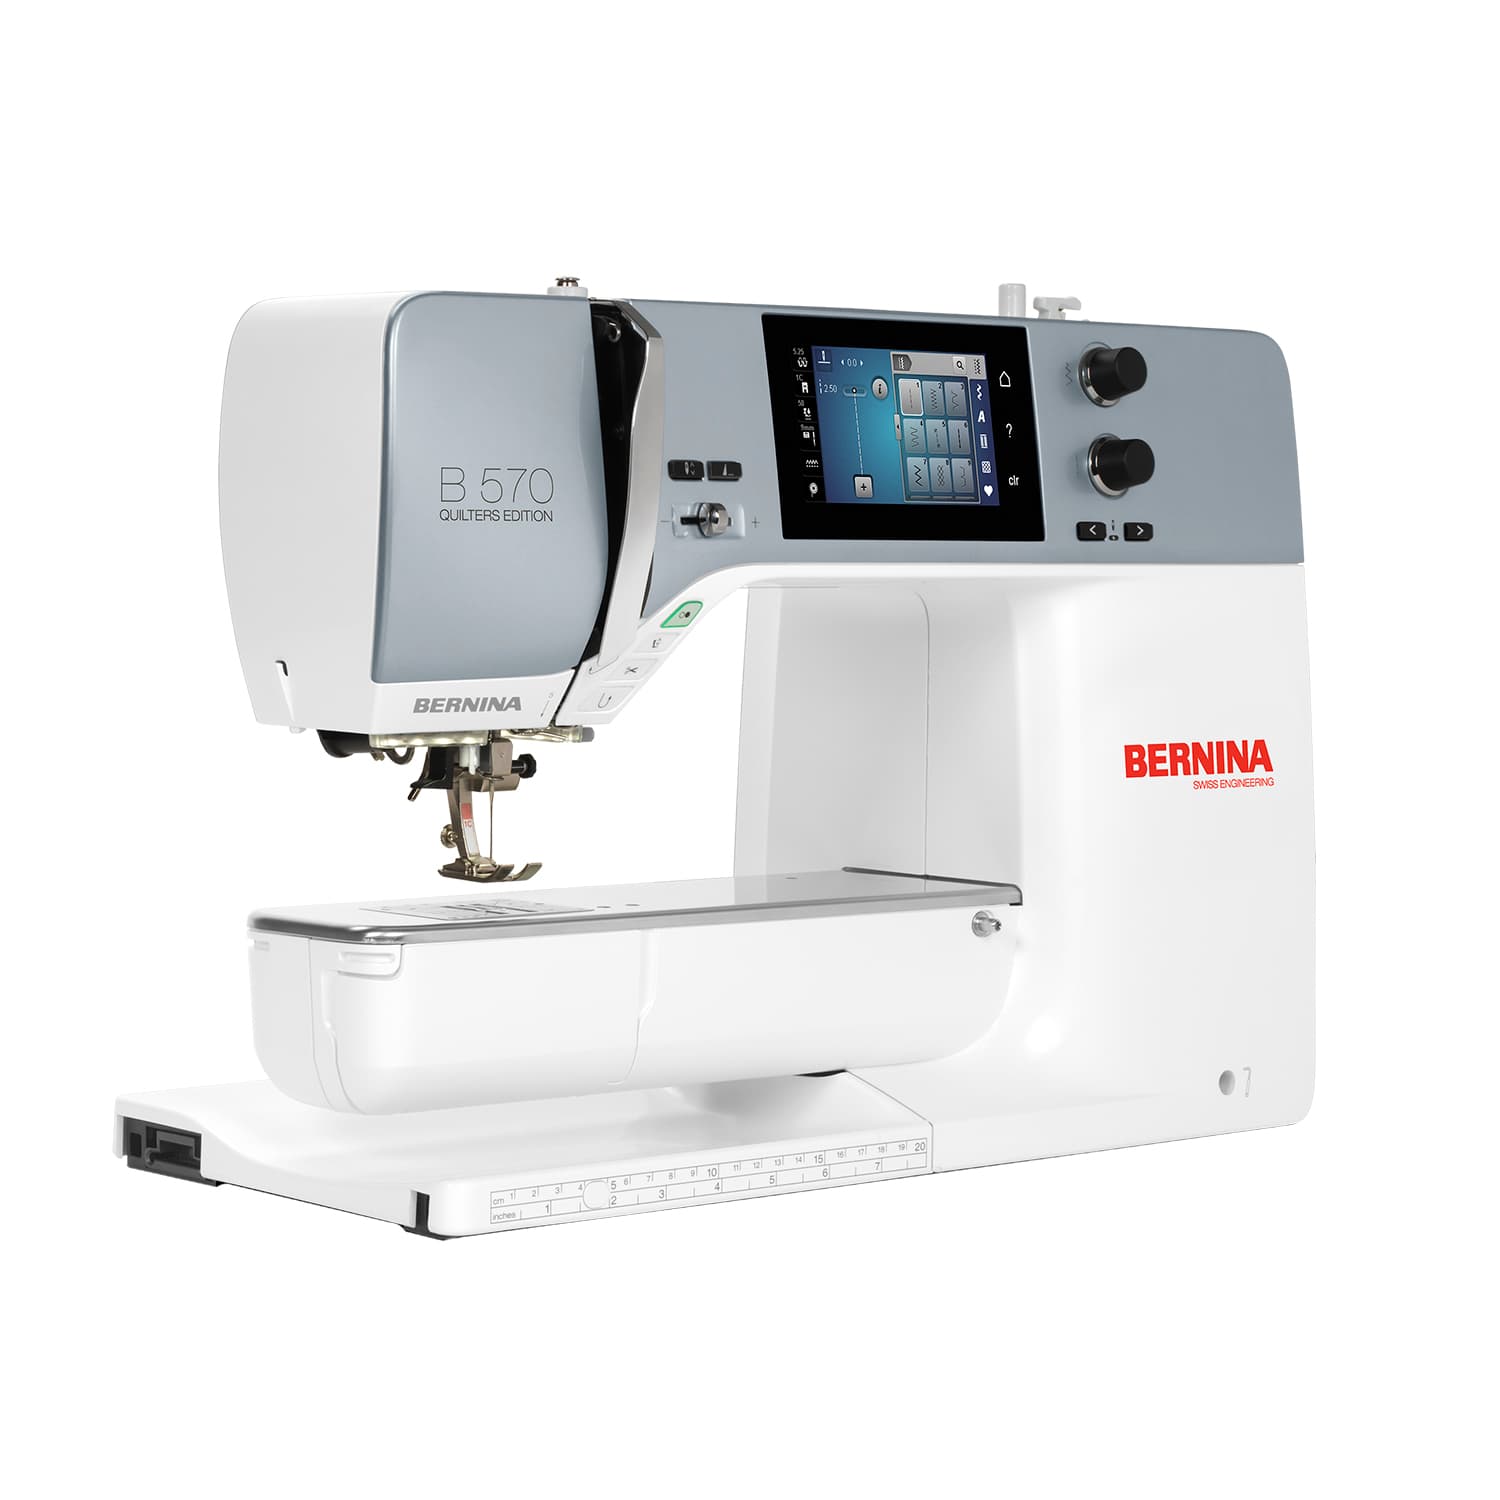 BERNINA 570 Quilters Edition Sewing Machine